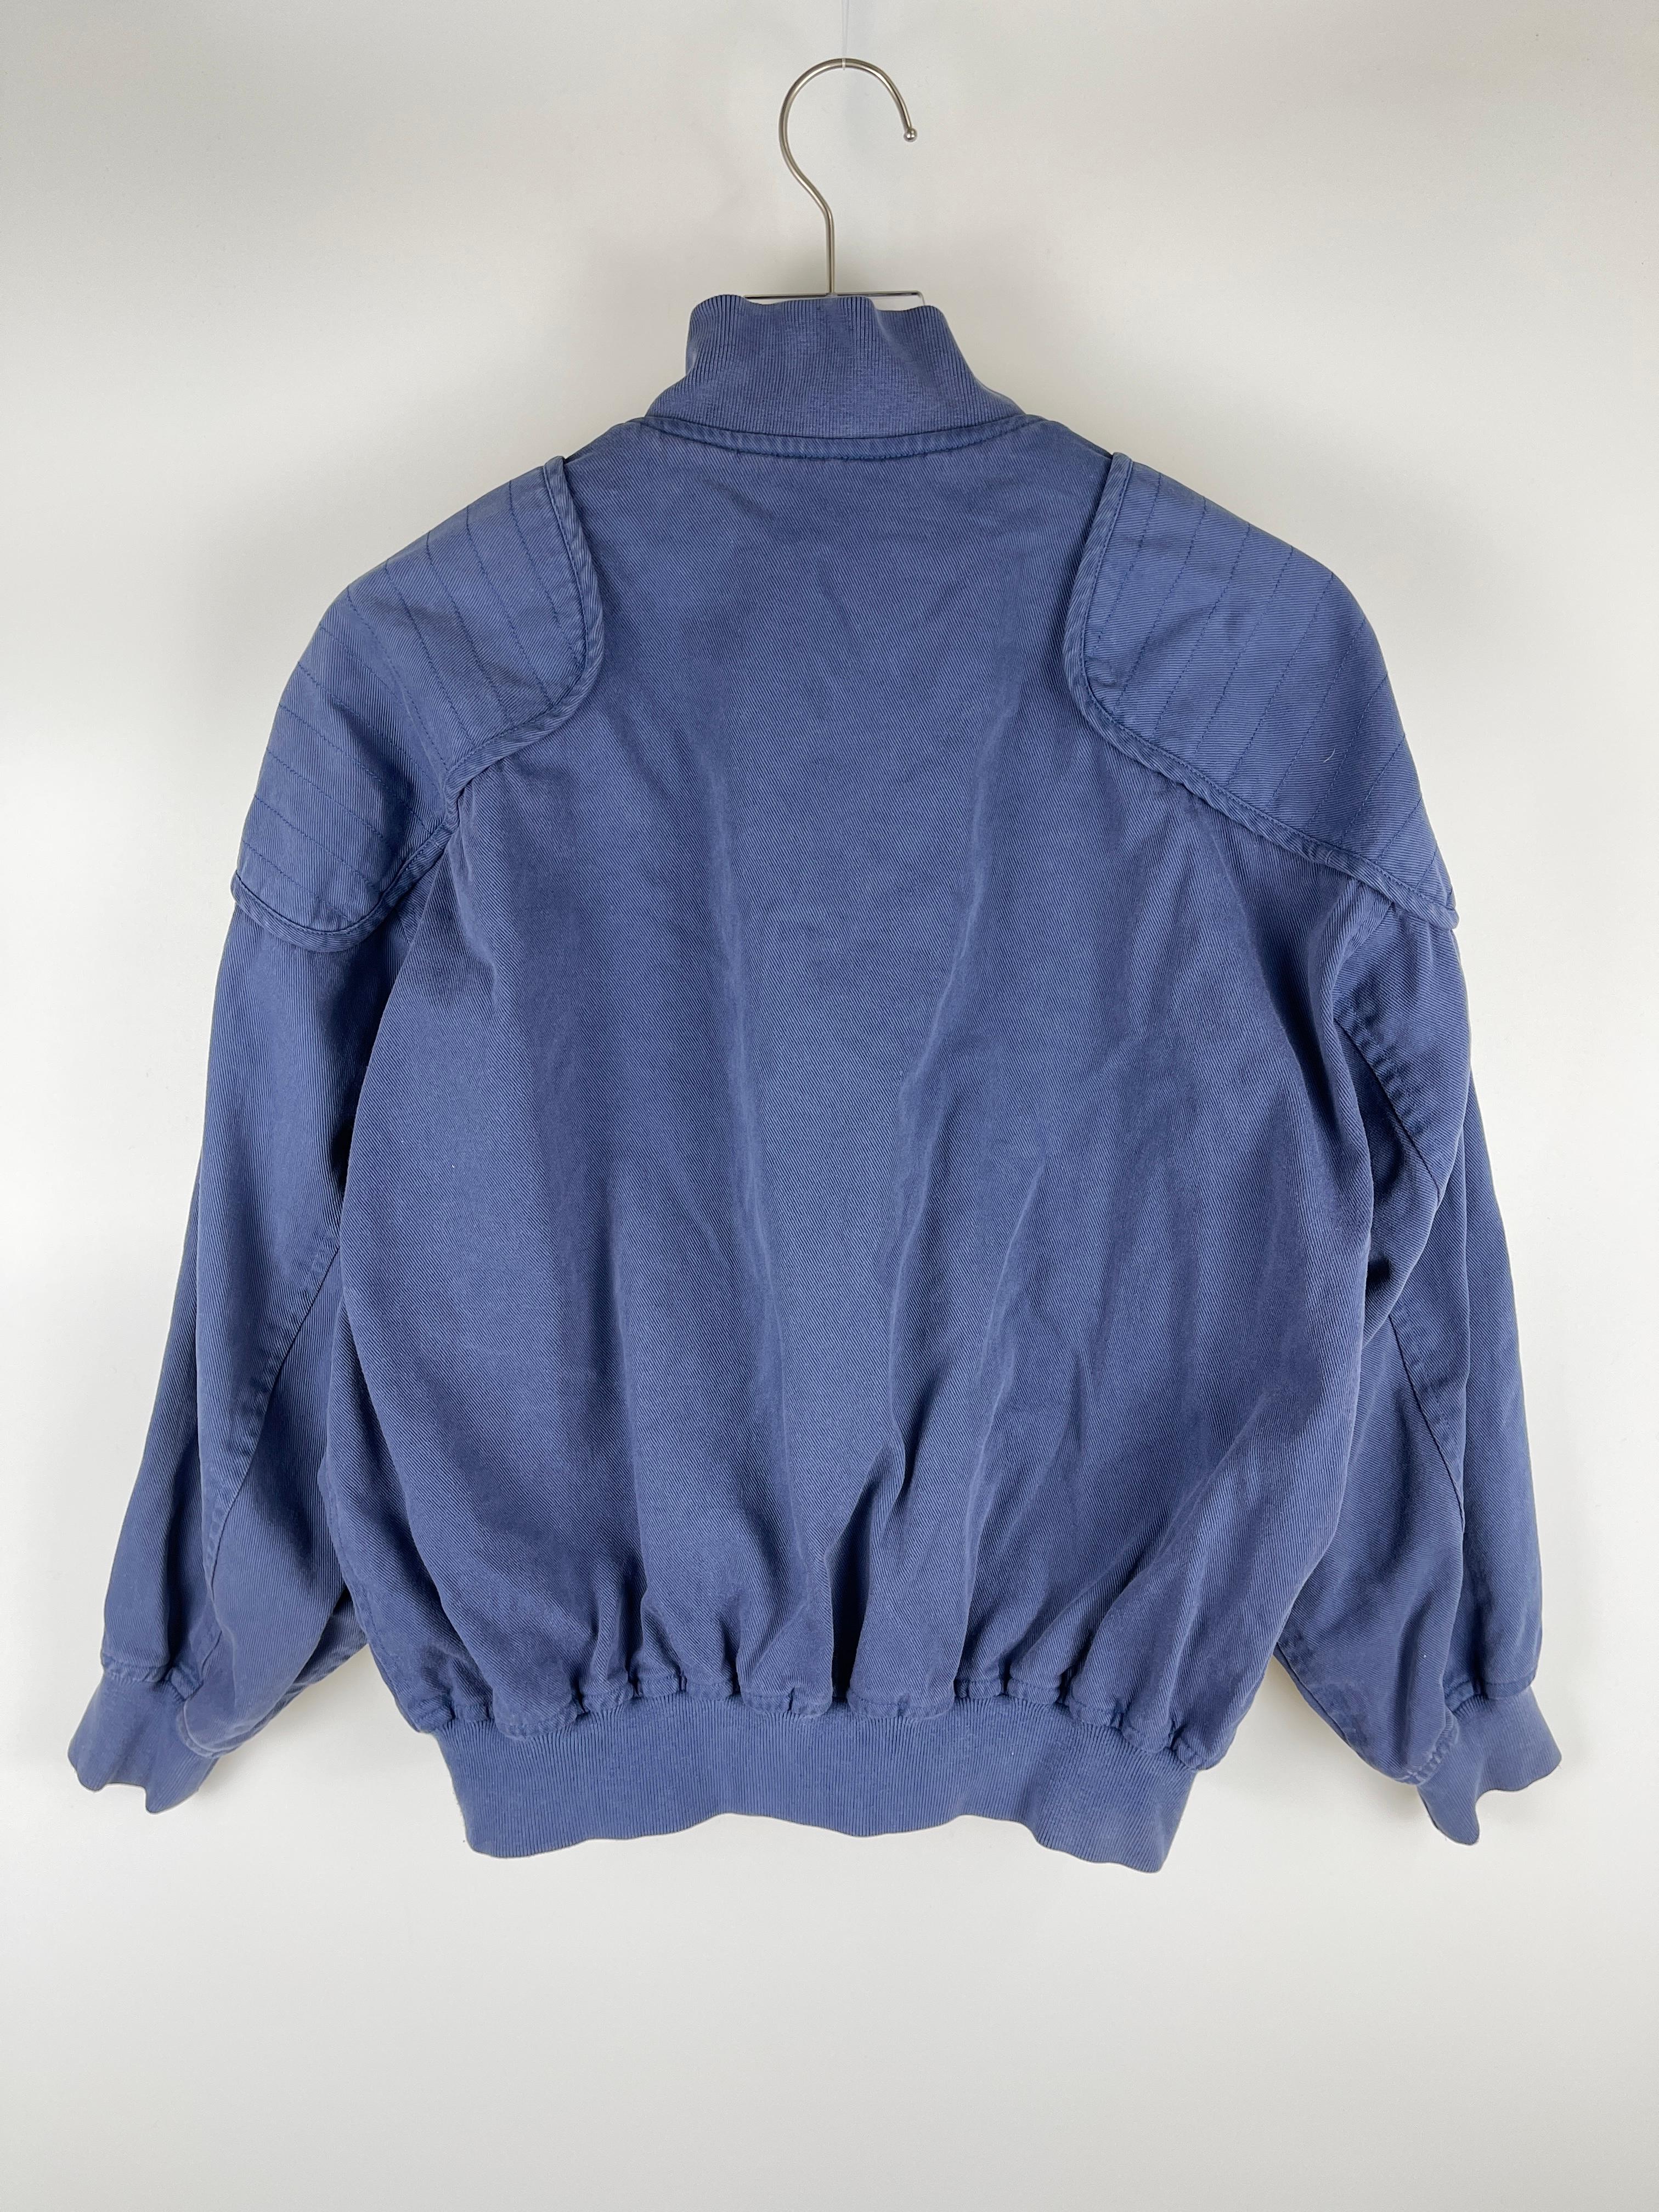 Issey Miyake 1980's Shoulder Pad Bomber Jacket In Good Condition For Sale In Seattle, WA